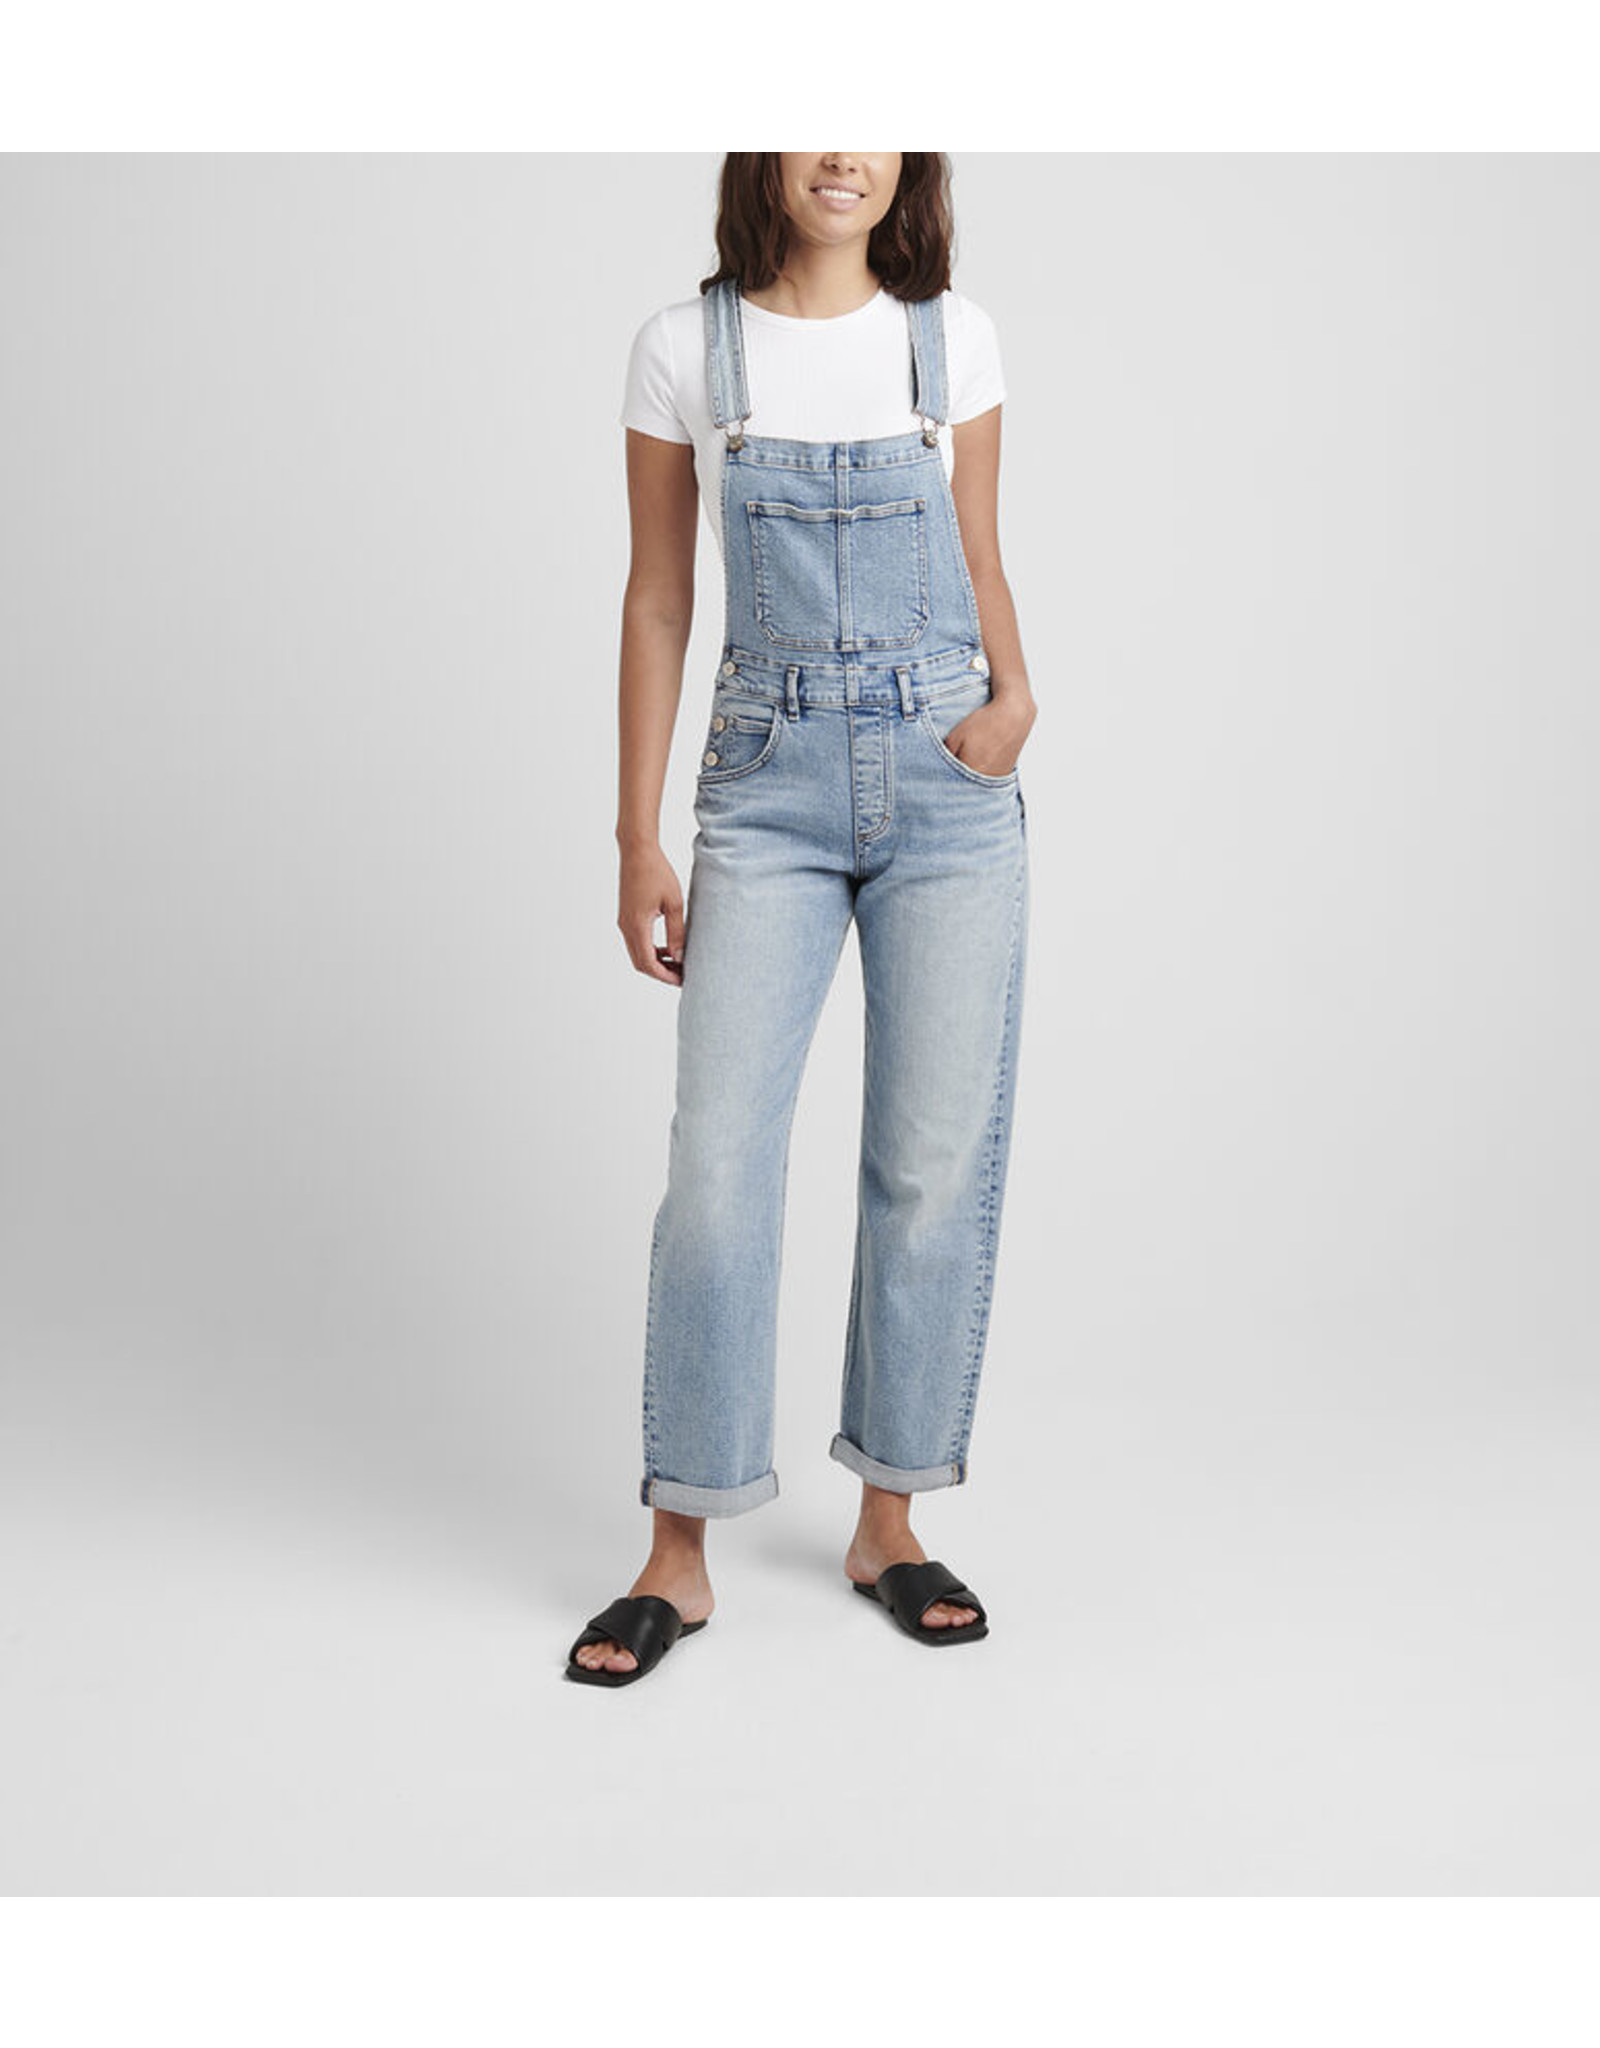 Silver Jeans - Baggy Straight Leg Overall